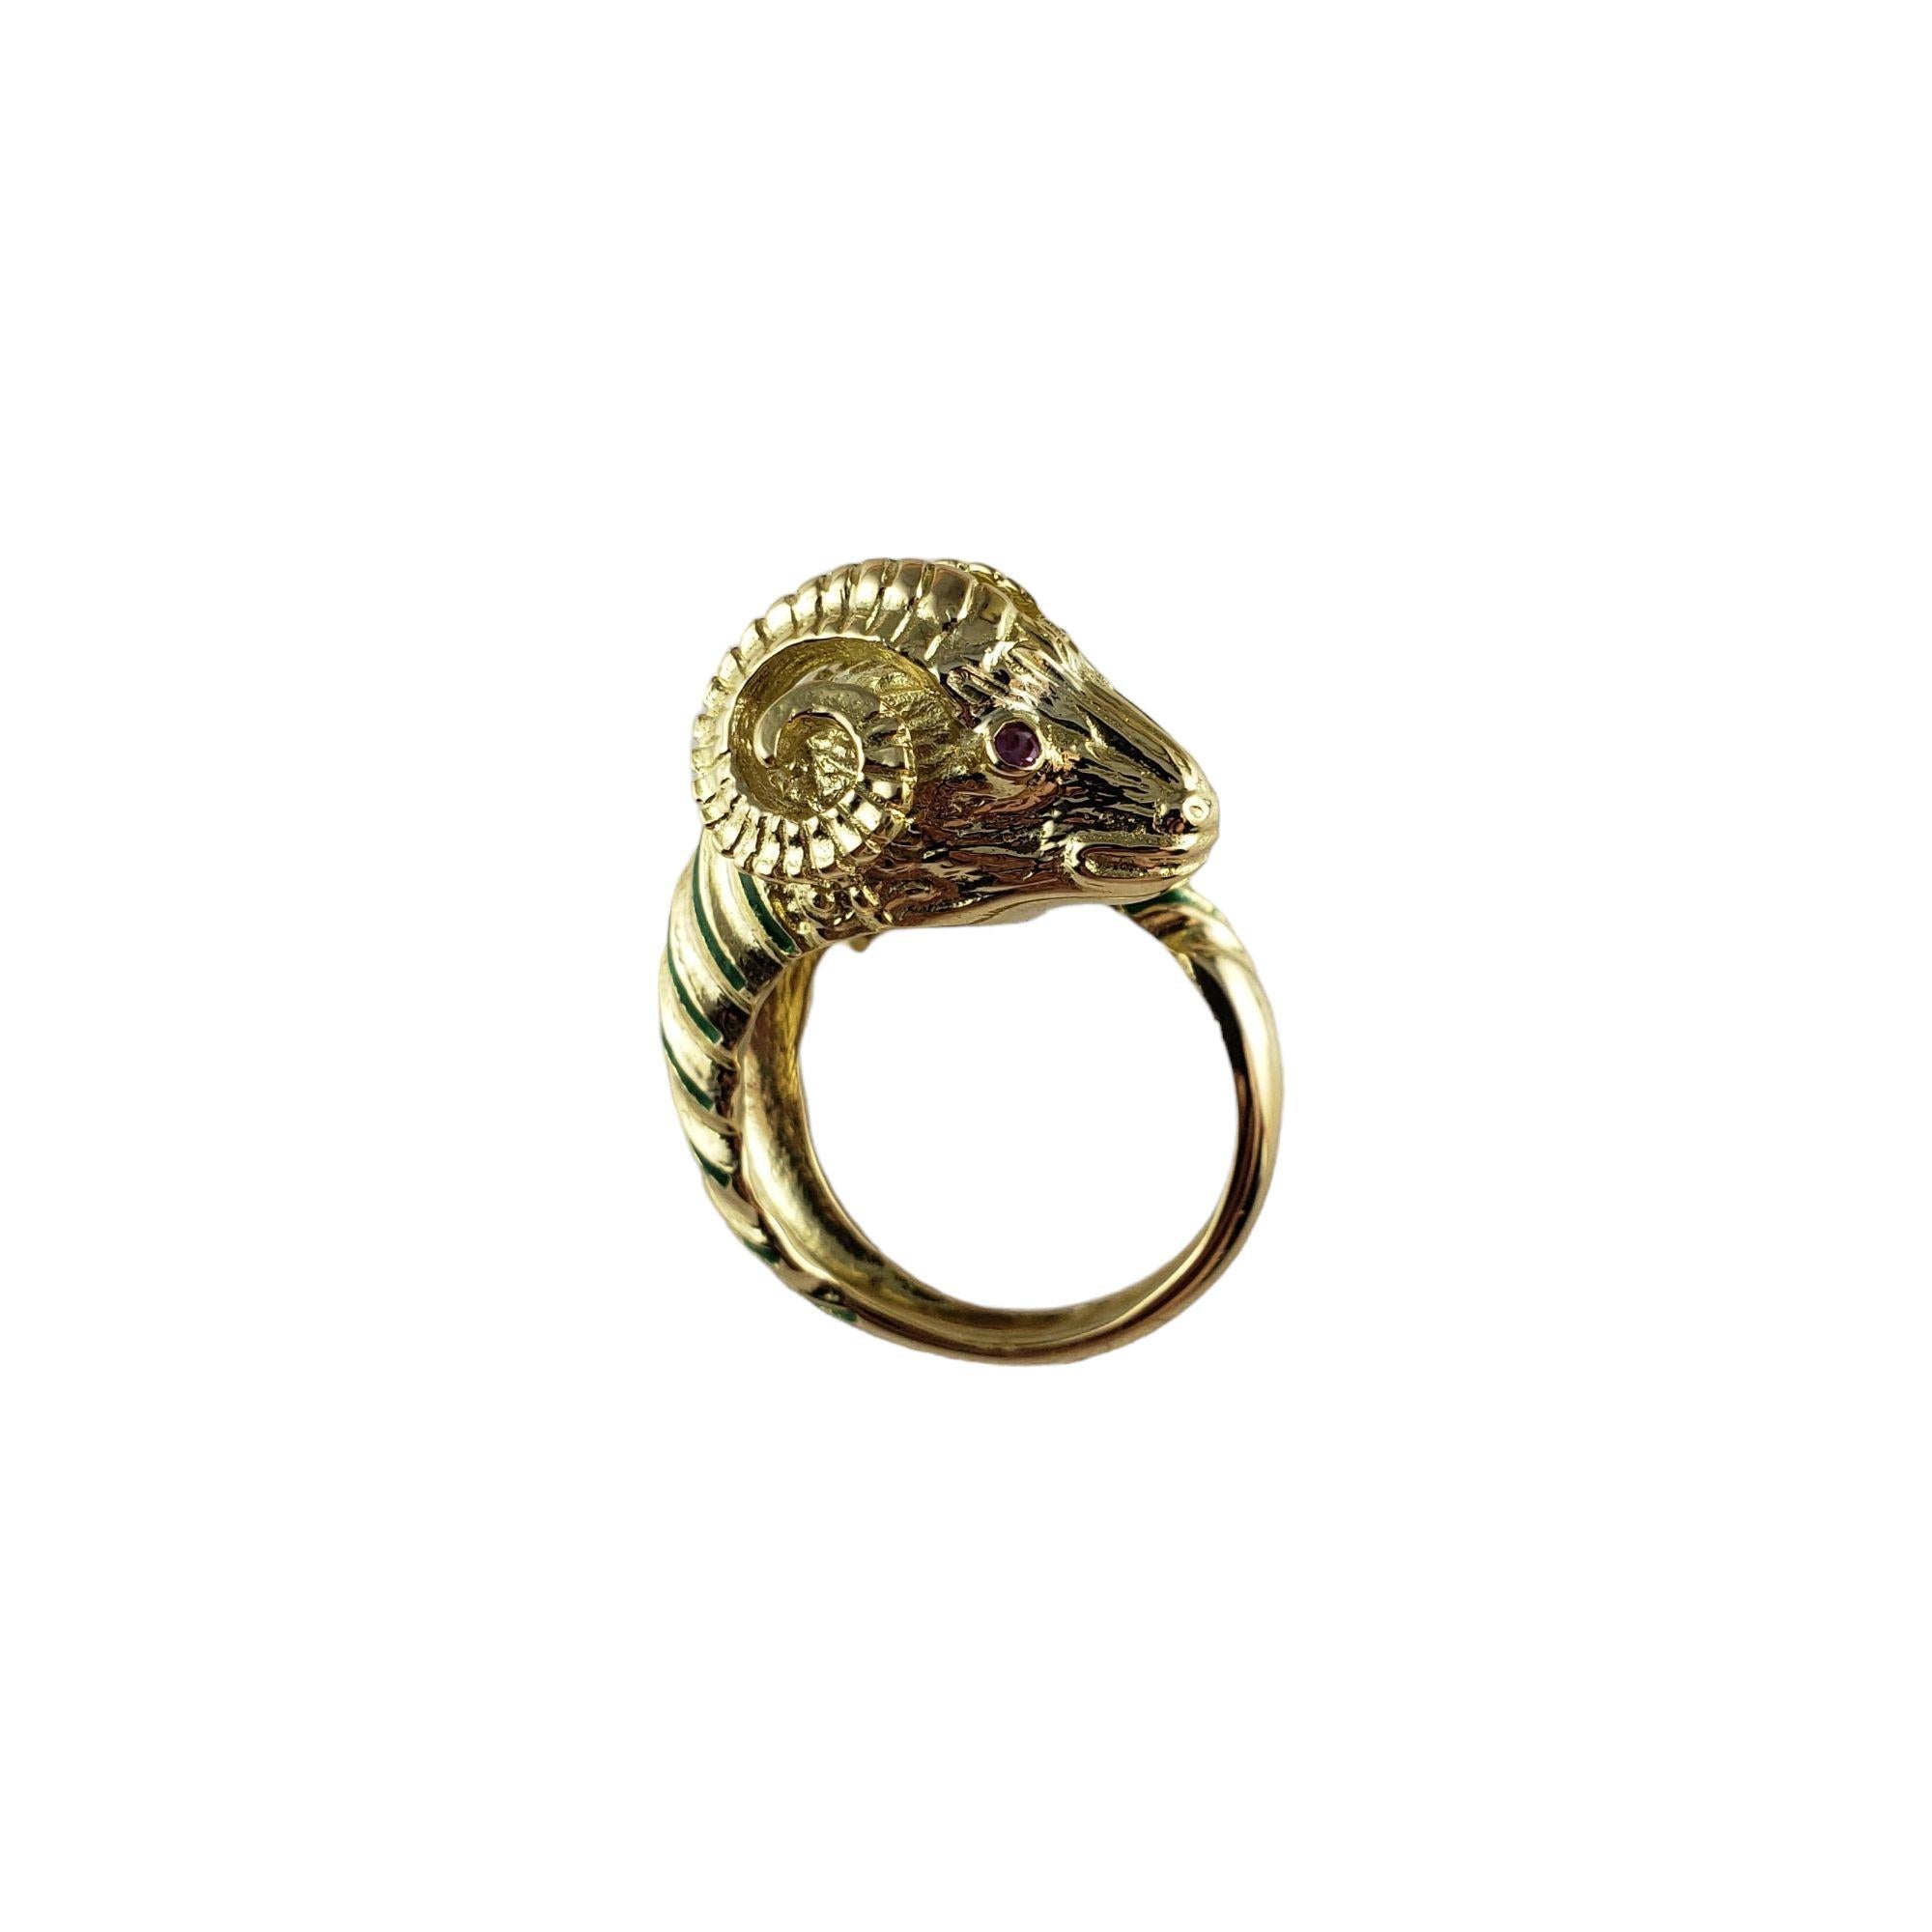 Vintage 18 Karat Yellow Gold Ram Ring Size 7-

This stunning 18K yellow gold ring features a beautifully detailed ram's head accented with green enamel and two red faceted stone eyes.  Width:  20 mm.  Shank: 3 mm.

Ring Size:  7

Weight:  9.5 dwt. /